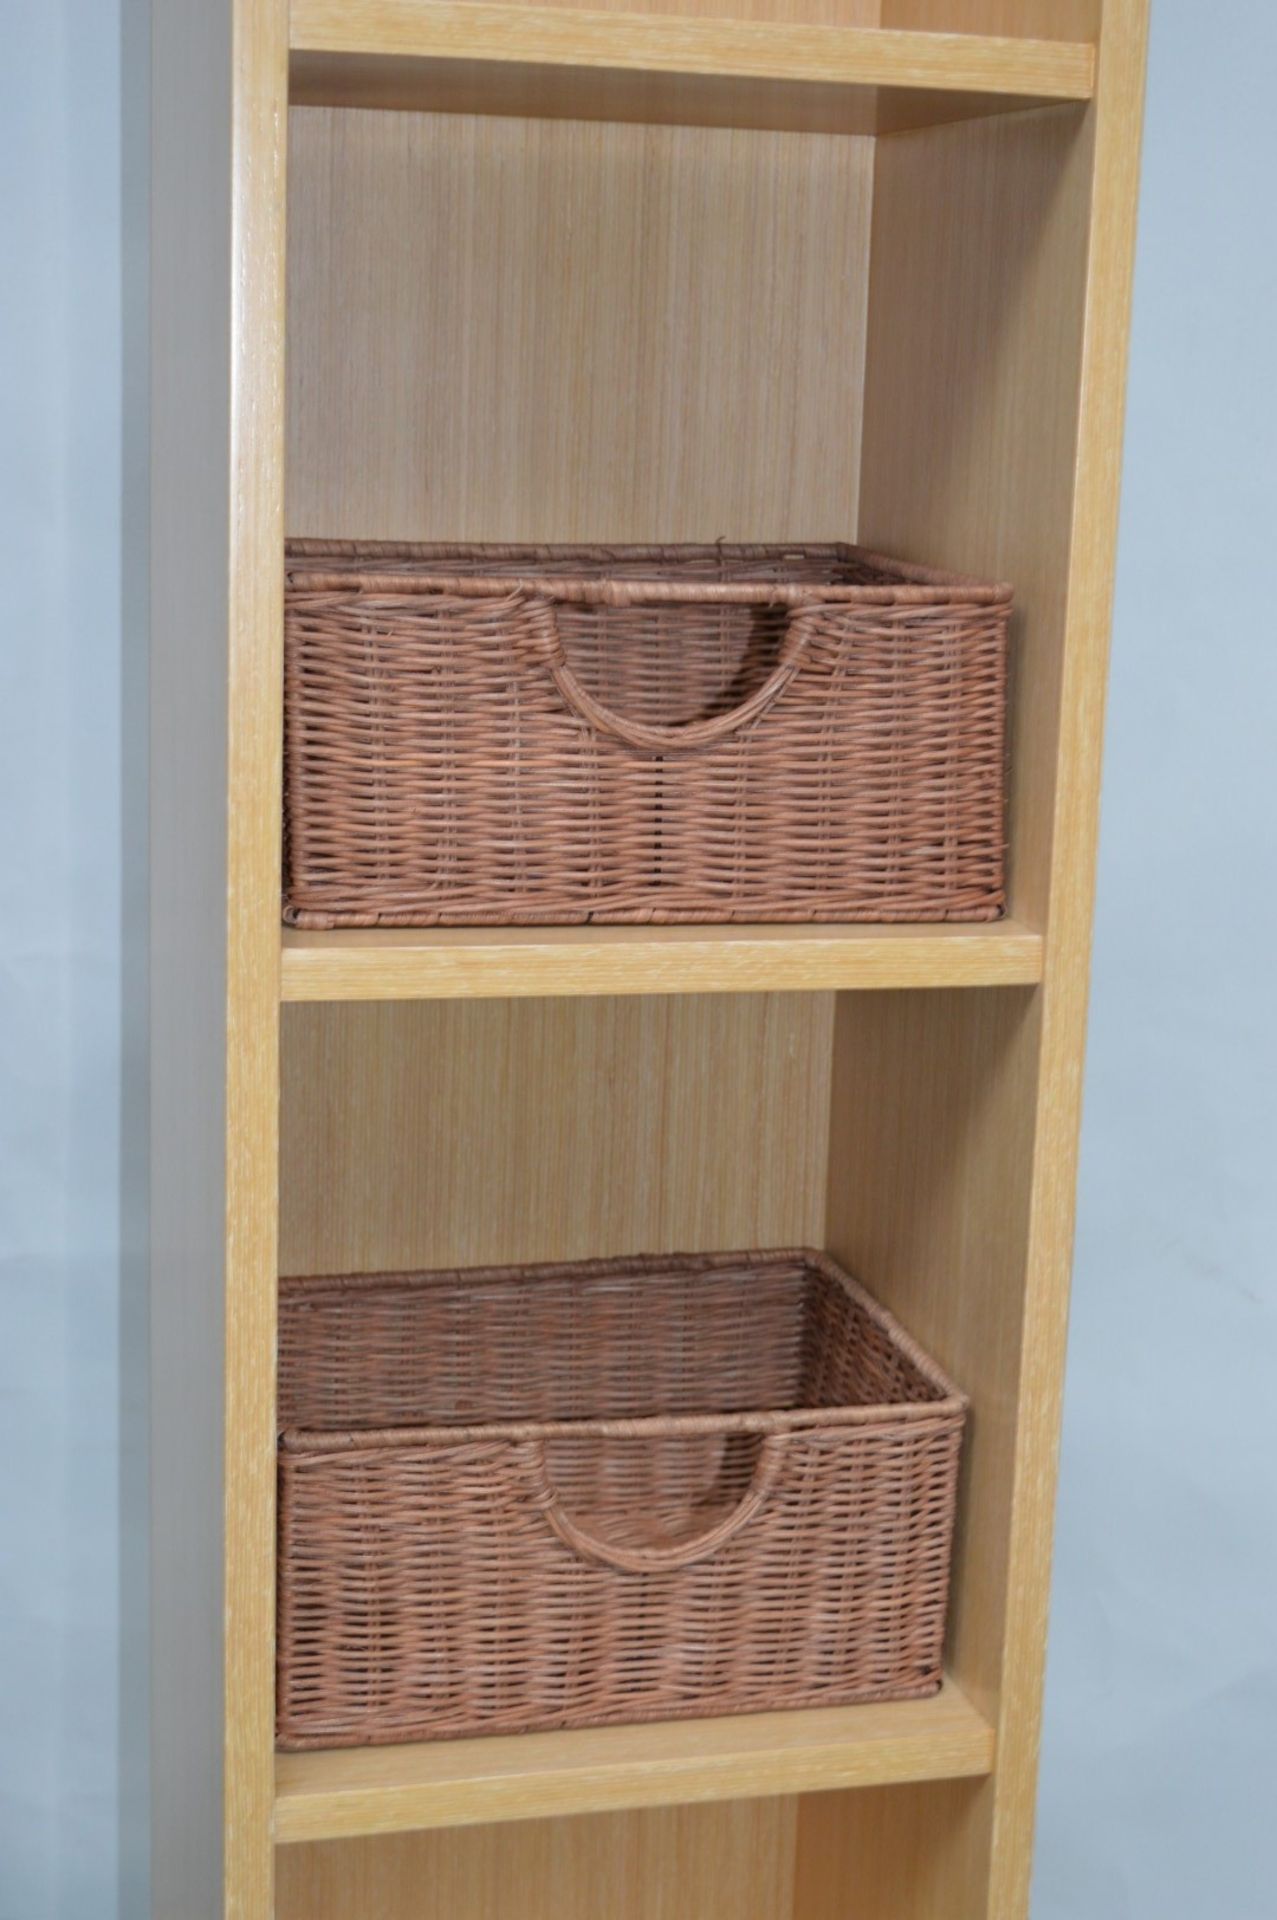 1 x Vogue ARC Series 2 Bathroom Storage Shelving Unit - Wall Mounted or Floor Standing - OAK - Image 7 of 9